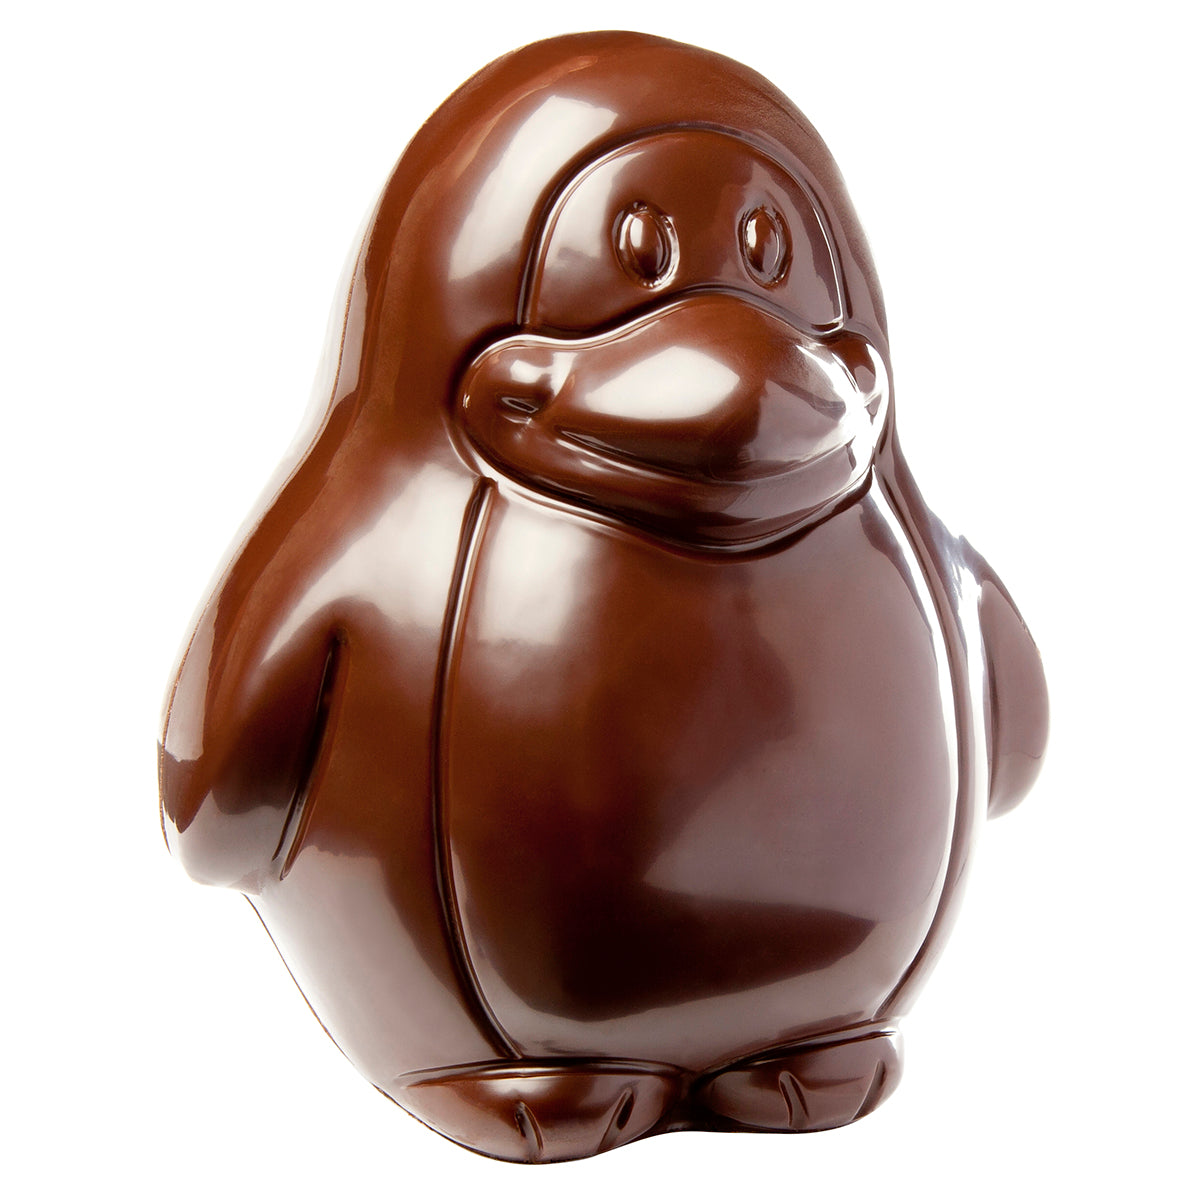 CHOCOLATE MOULD MAGNETIC PENGUIN 150 mm HM013 - Zucchero Canada